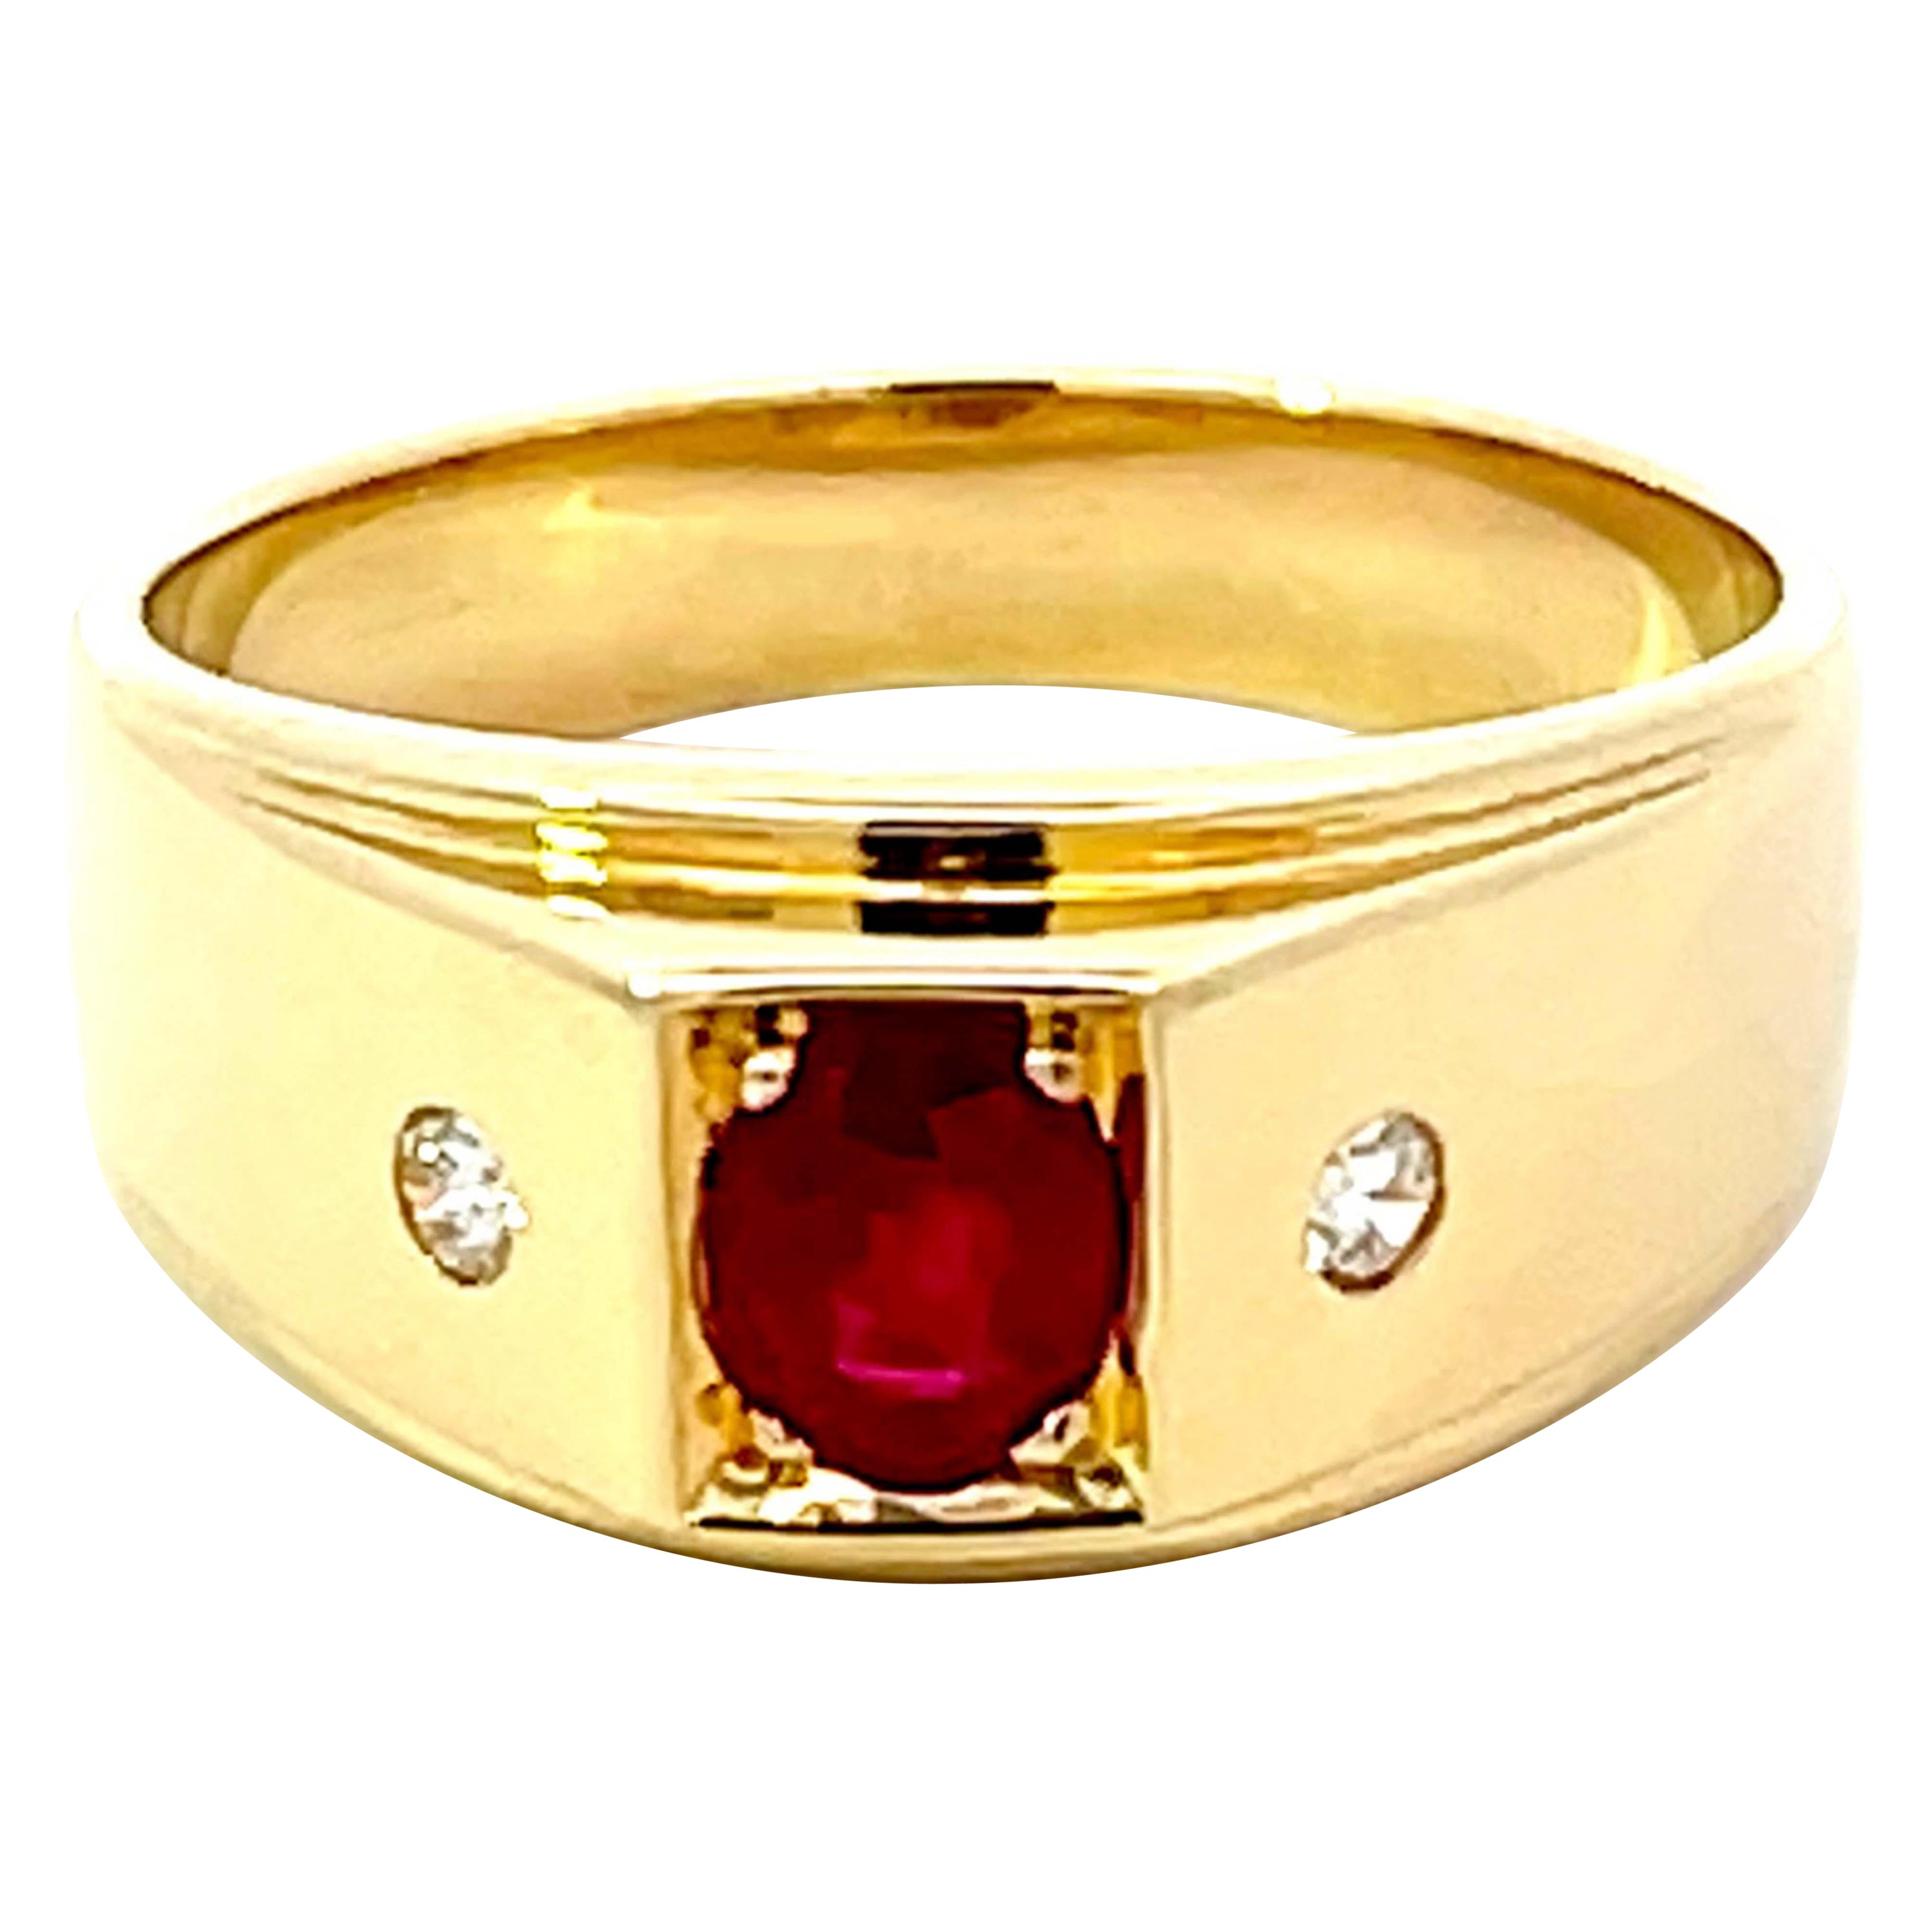 How much is a red ruby ring worth?